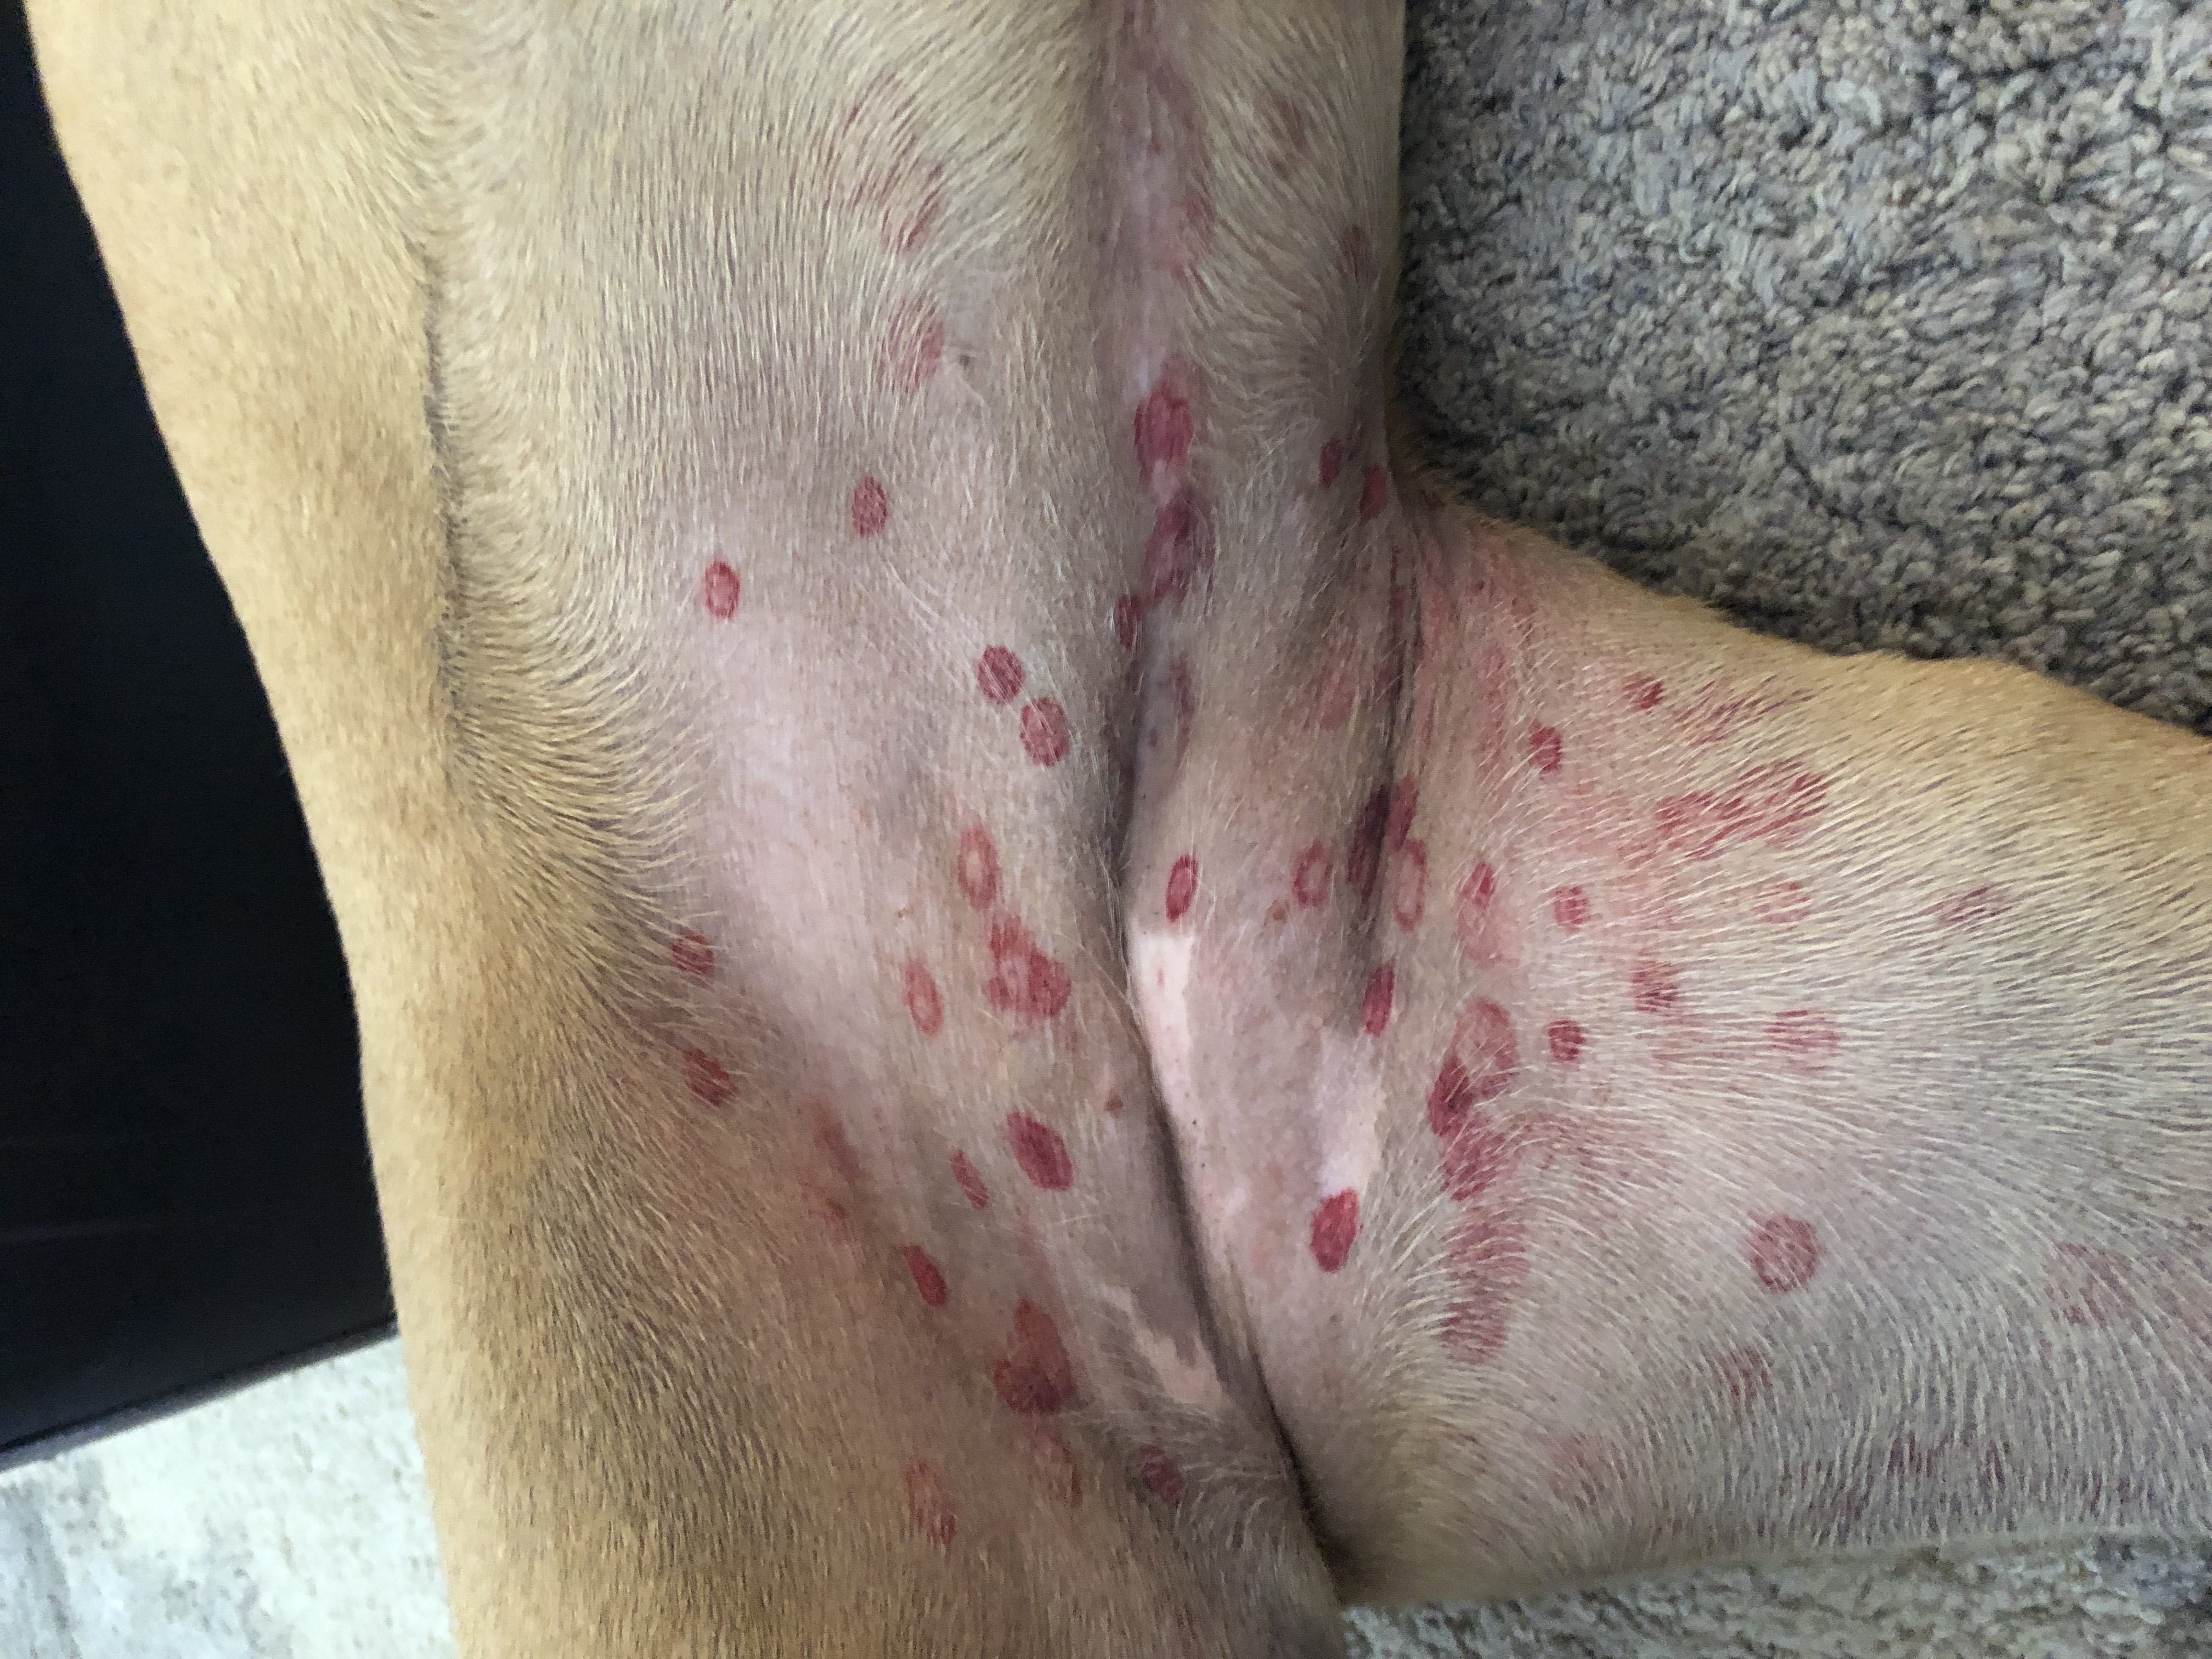 how to stop horse flies from biting dogs